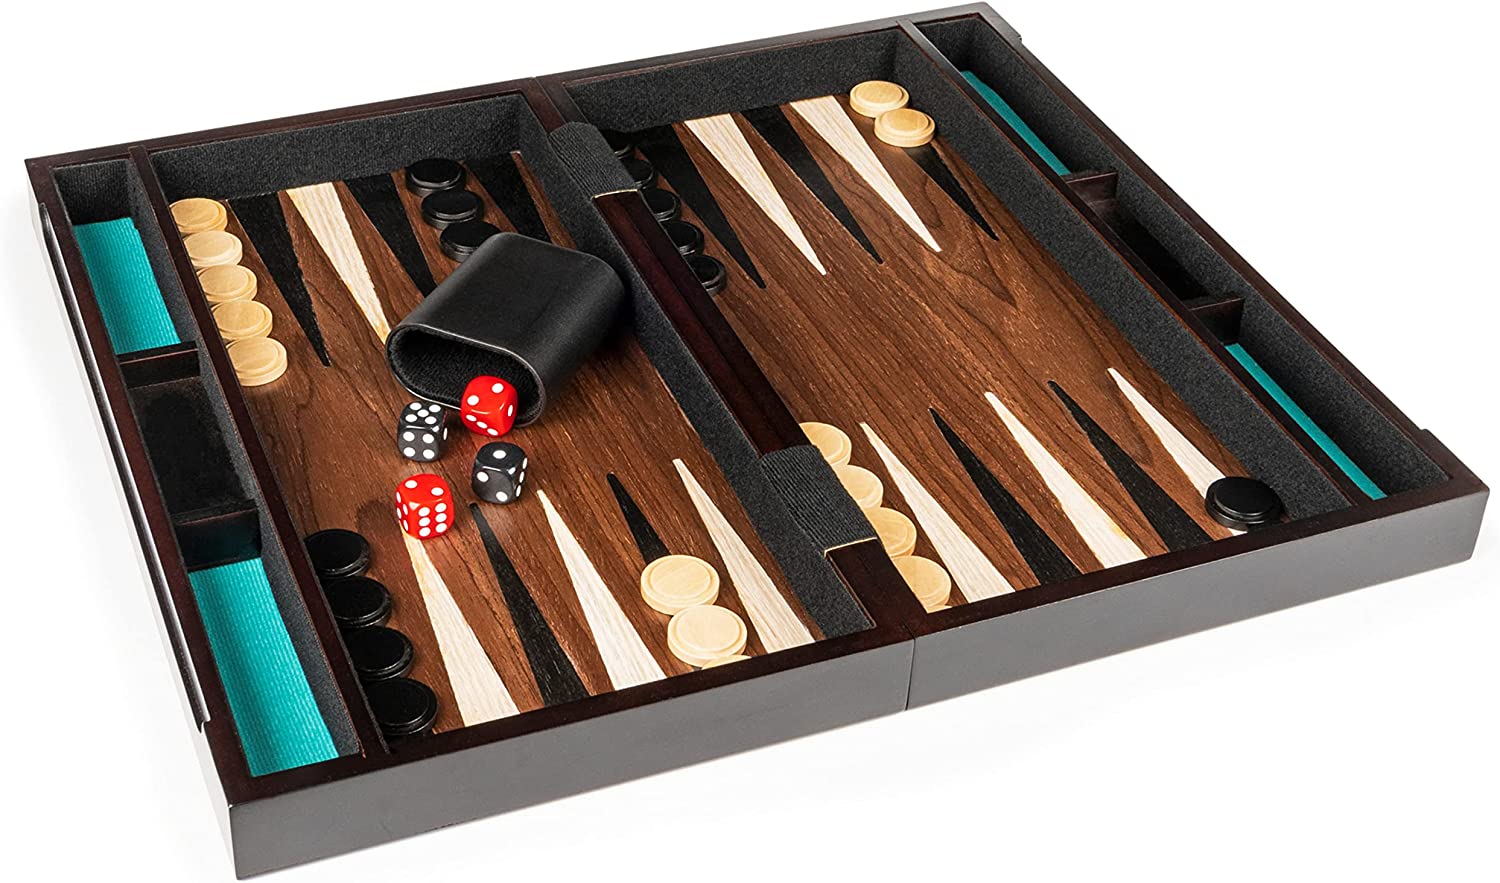 ''Legacy Deluxe Wooden Backgammon Classic 2-Player Original Board GAME Set with Cups and Dice, for Ki